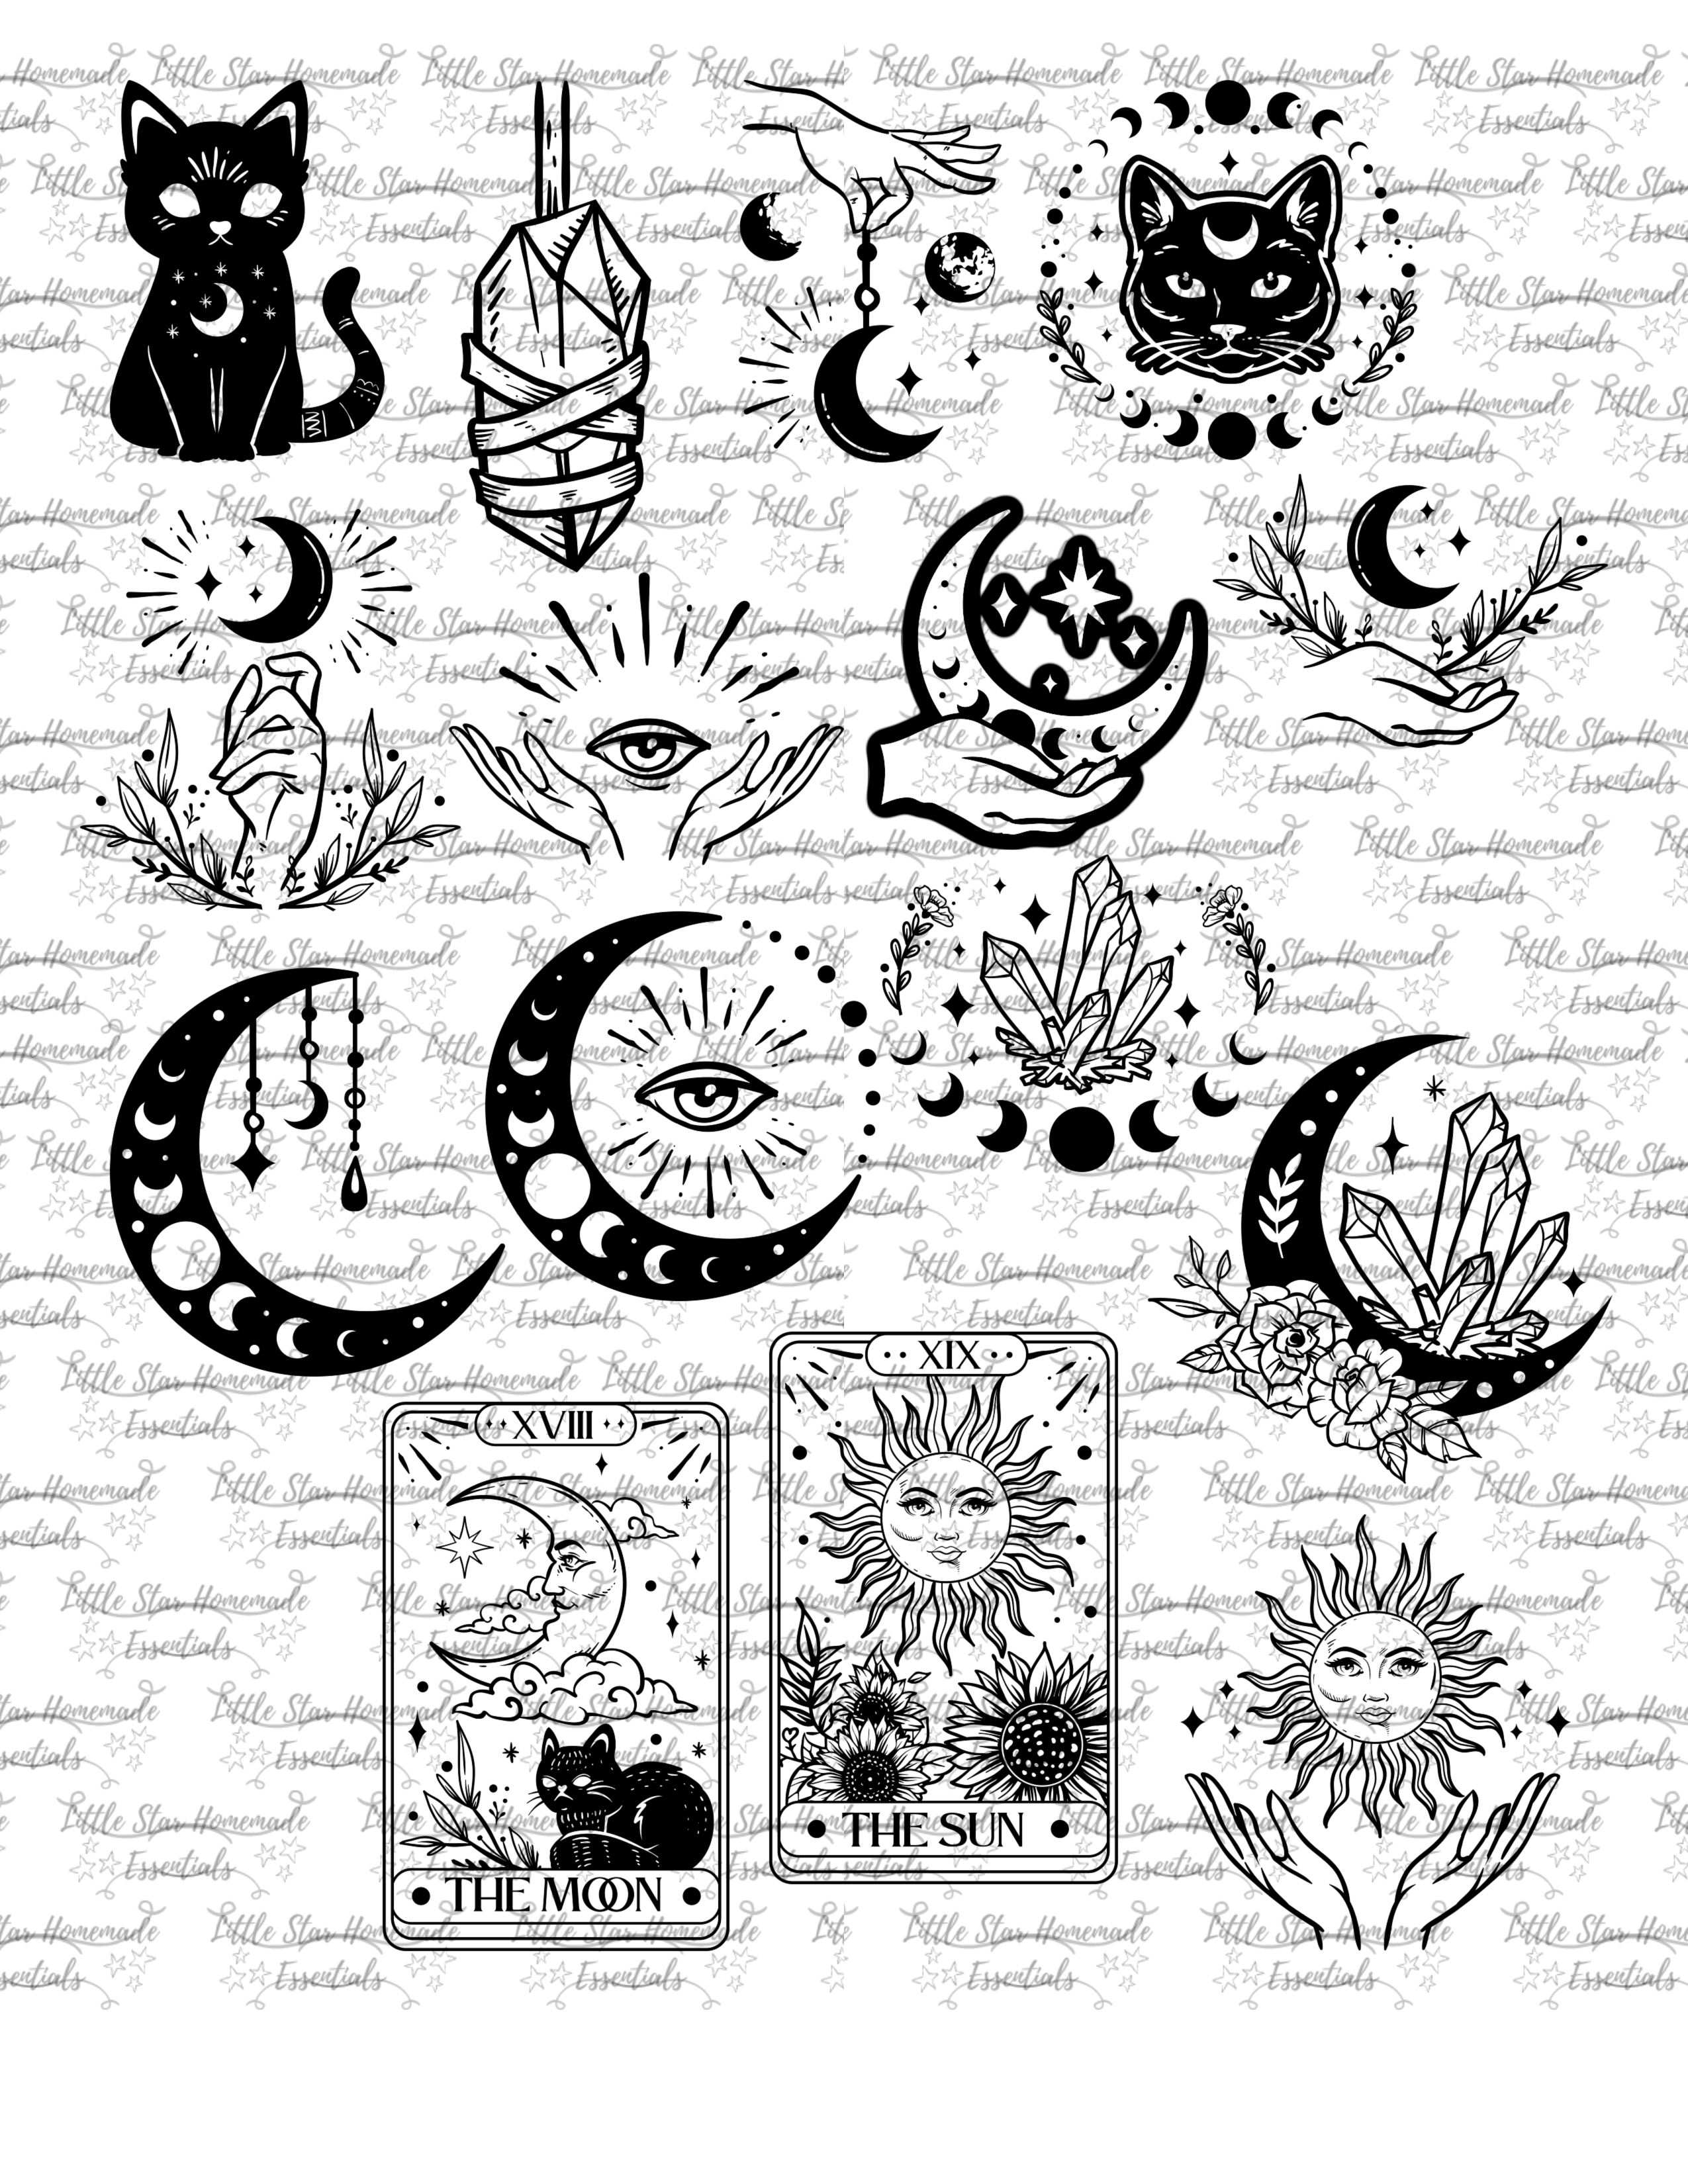 Celestial Rituals ✧ Sticker Sheet ☾ — Lace & Whimsy